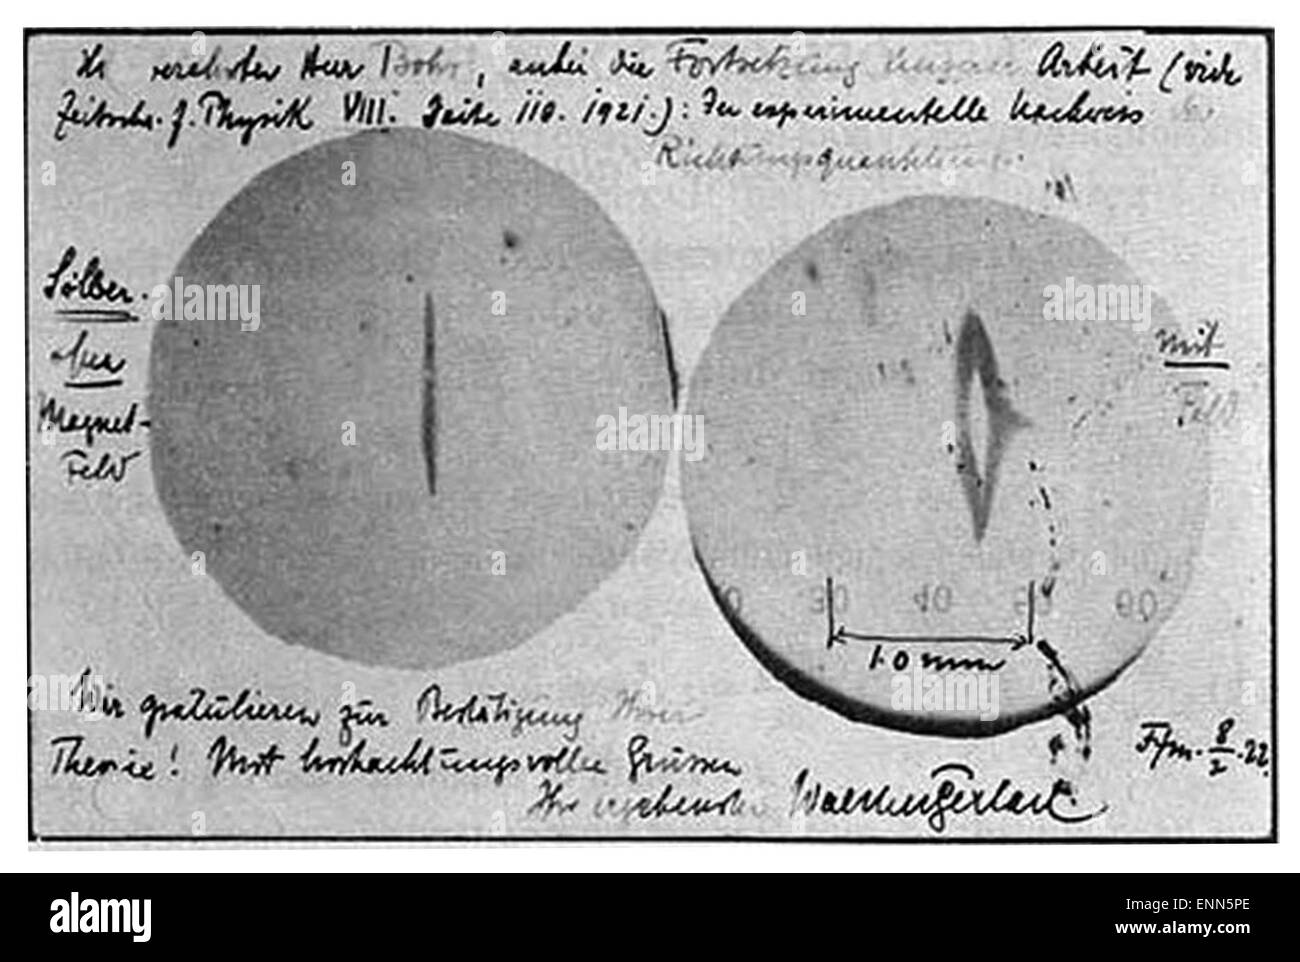 Postcard sent from Walther Gerlach to Niels Bohr on February 8 1922 shows a photograph of the beam splitting.  The message reads: '“....the experimental proof of directional quantisation. We congratulate you on the confirmation of your theory....” Stock Photo